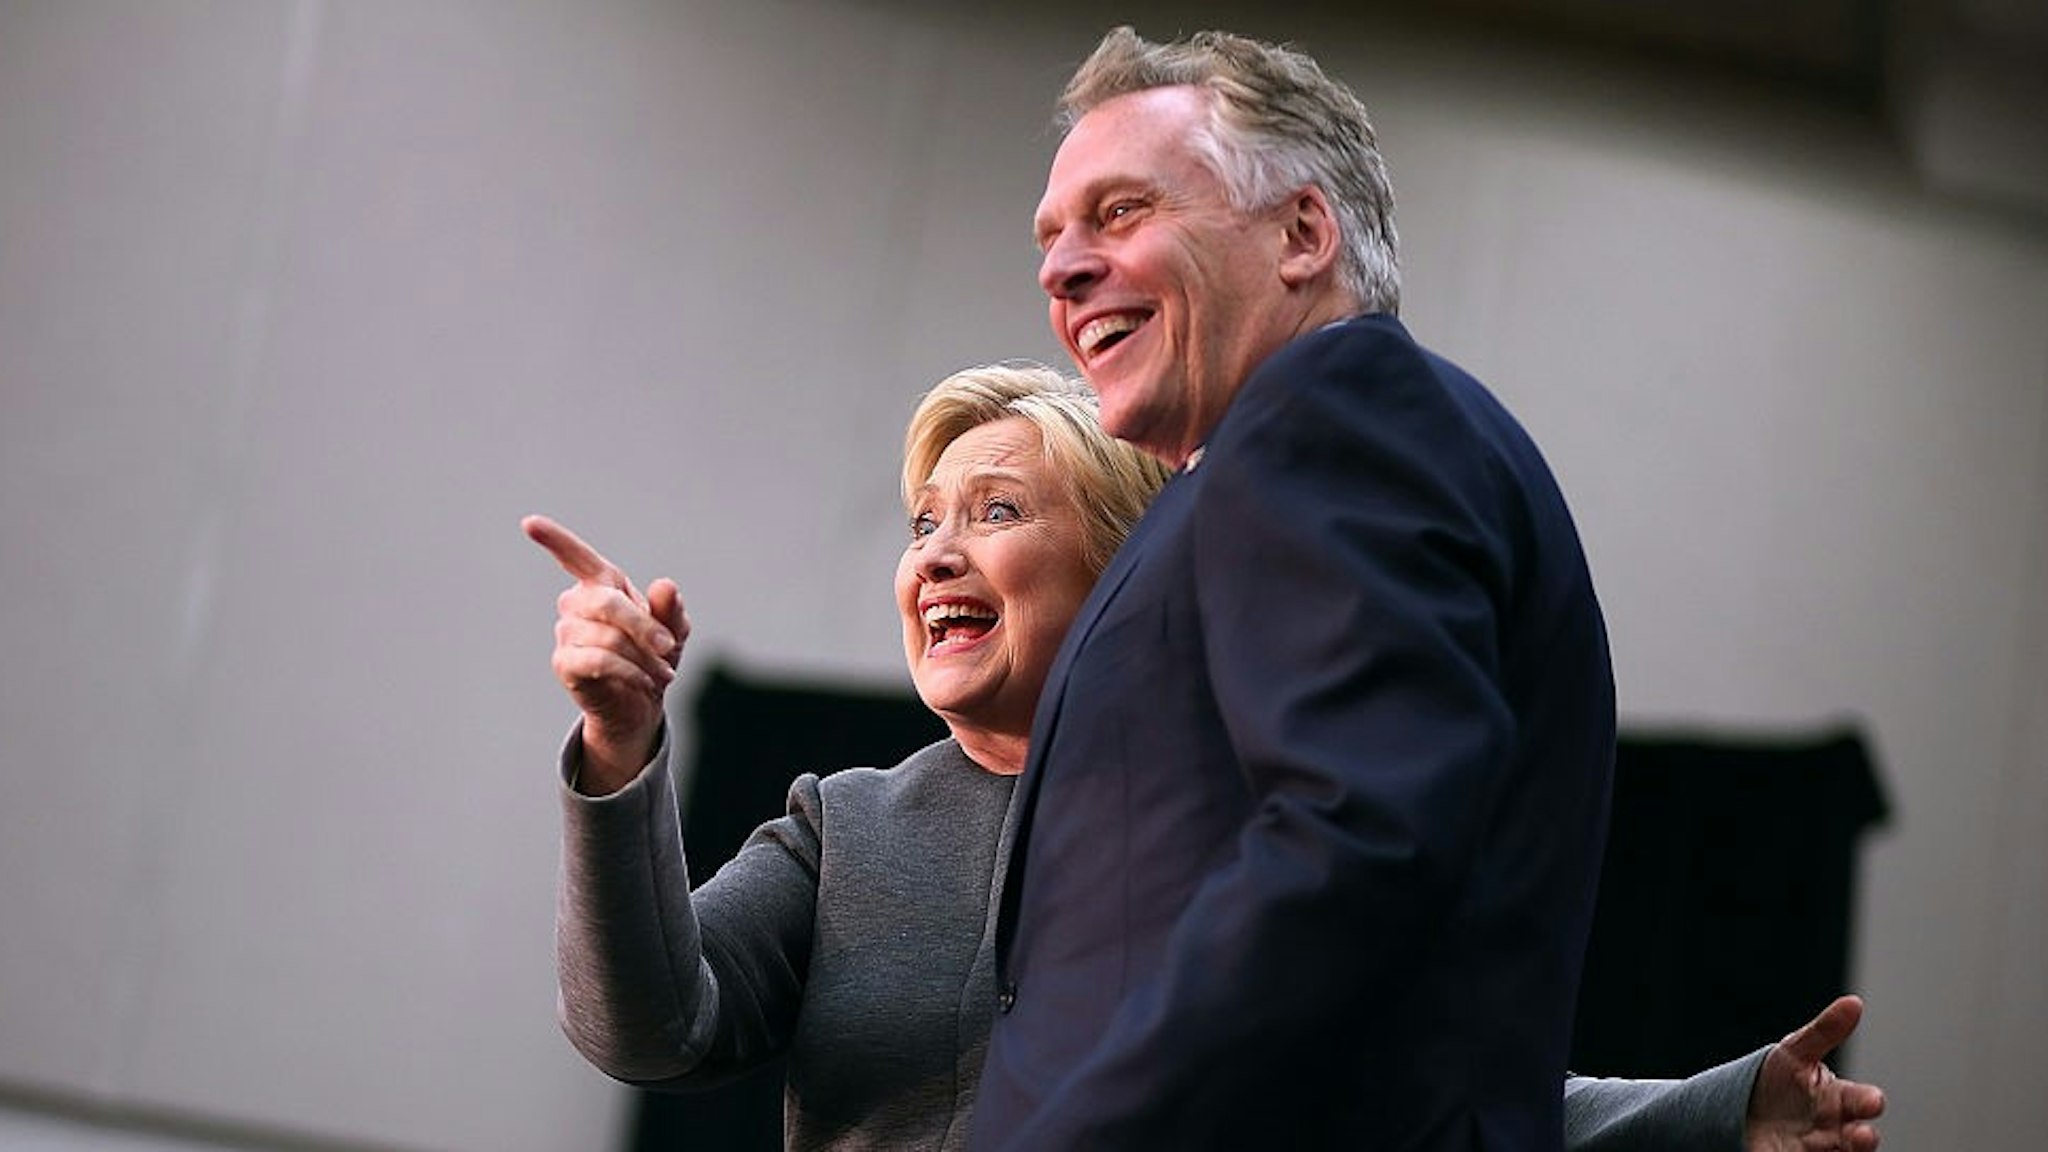 FAIRFAX, VA - FEBRUARY 29: Democratic presidential candidate former Secretary of State Hillary Clinton greets supporters with Virginia Gov. Terry McAuliffe during a "Get Out The Vote" event at George Mason University on February 29, 2016 in Fairfax, Virginia. Hillary Clinton is campaigning in Massachusetts and Virginia ahead of Super Tuesday. (Photo by